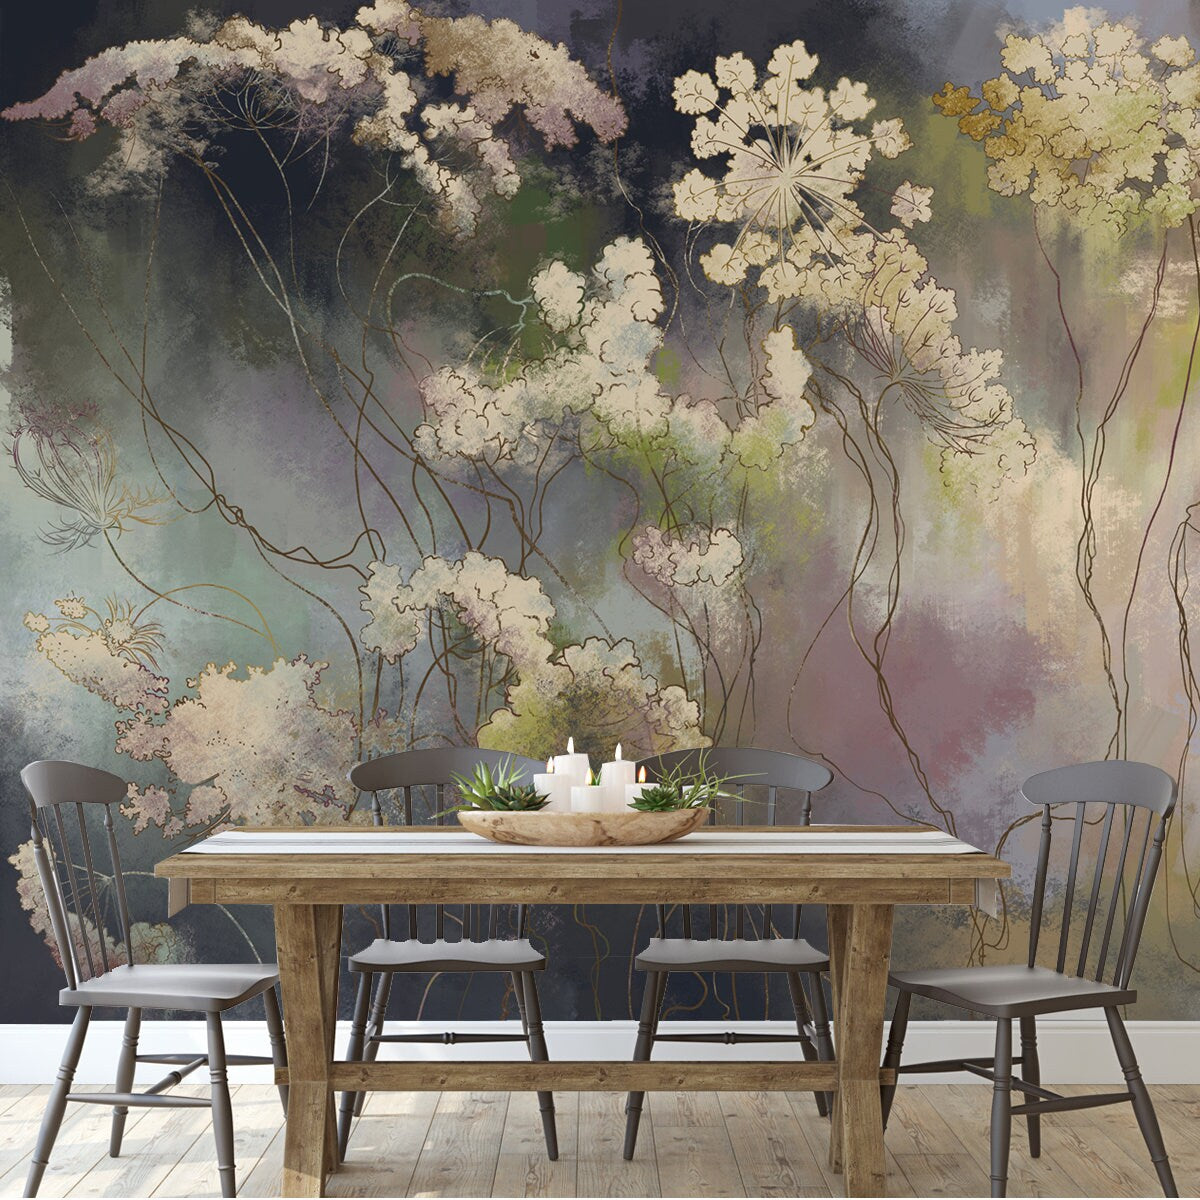 Graphic Wildflowers Painted on Dark Colorful Wall. Floral Background in Loft, Modern Style Wallpaper Dining Room Mural